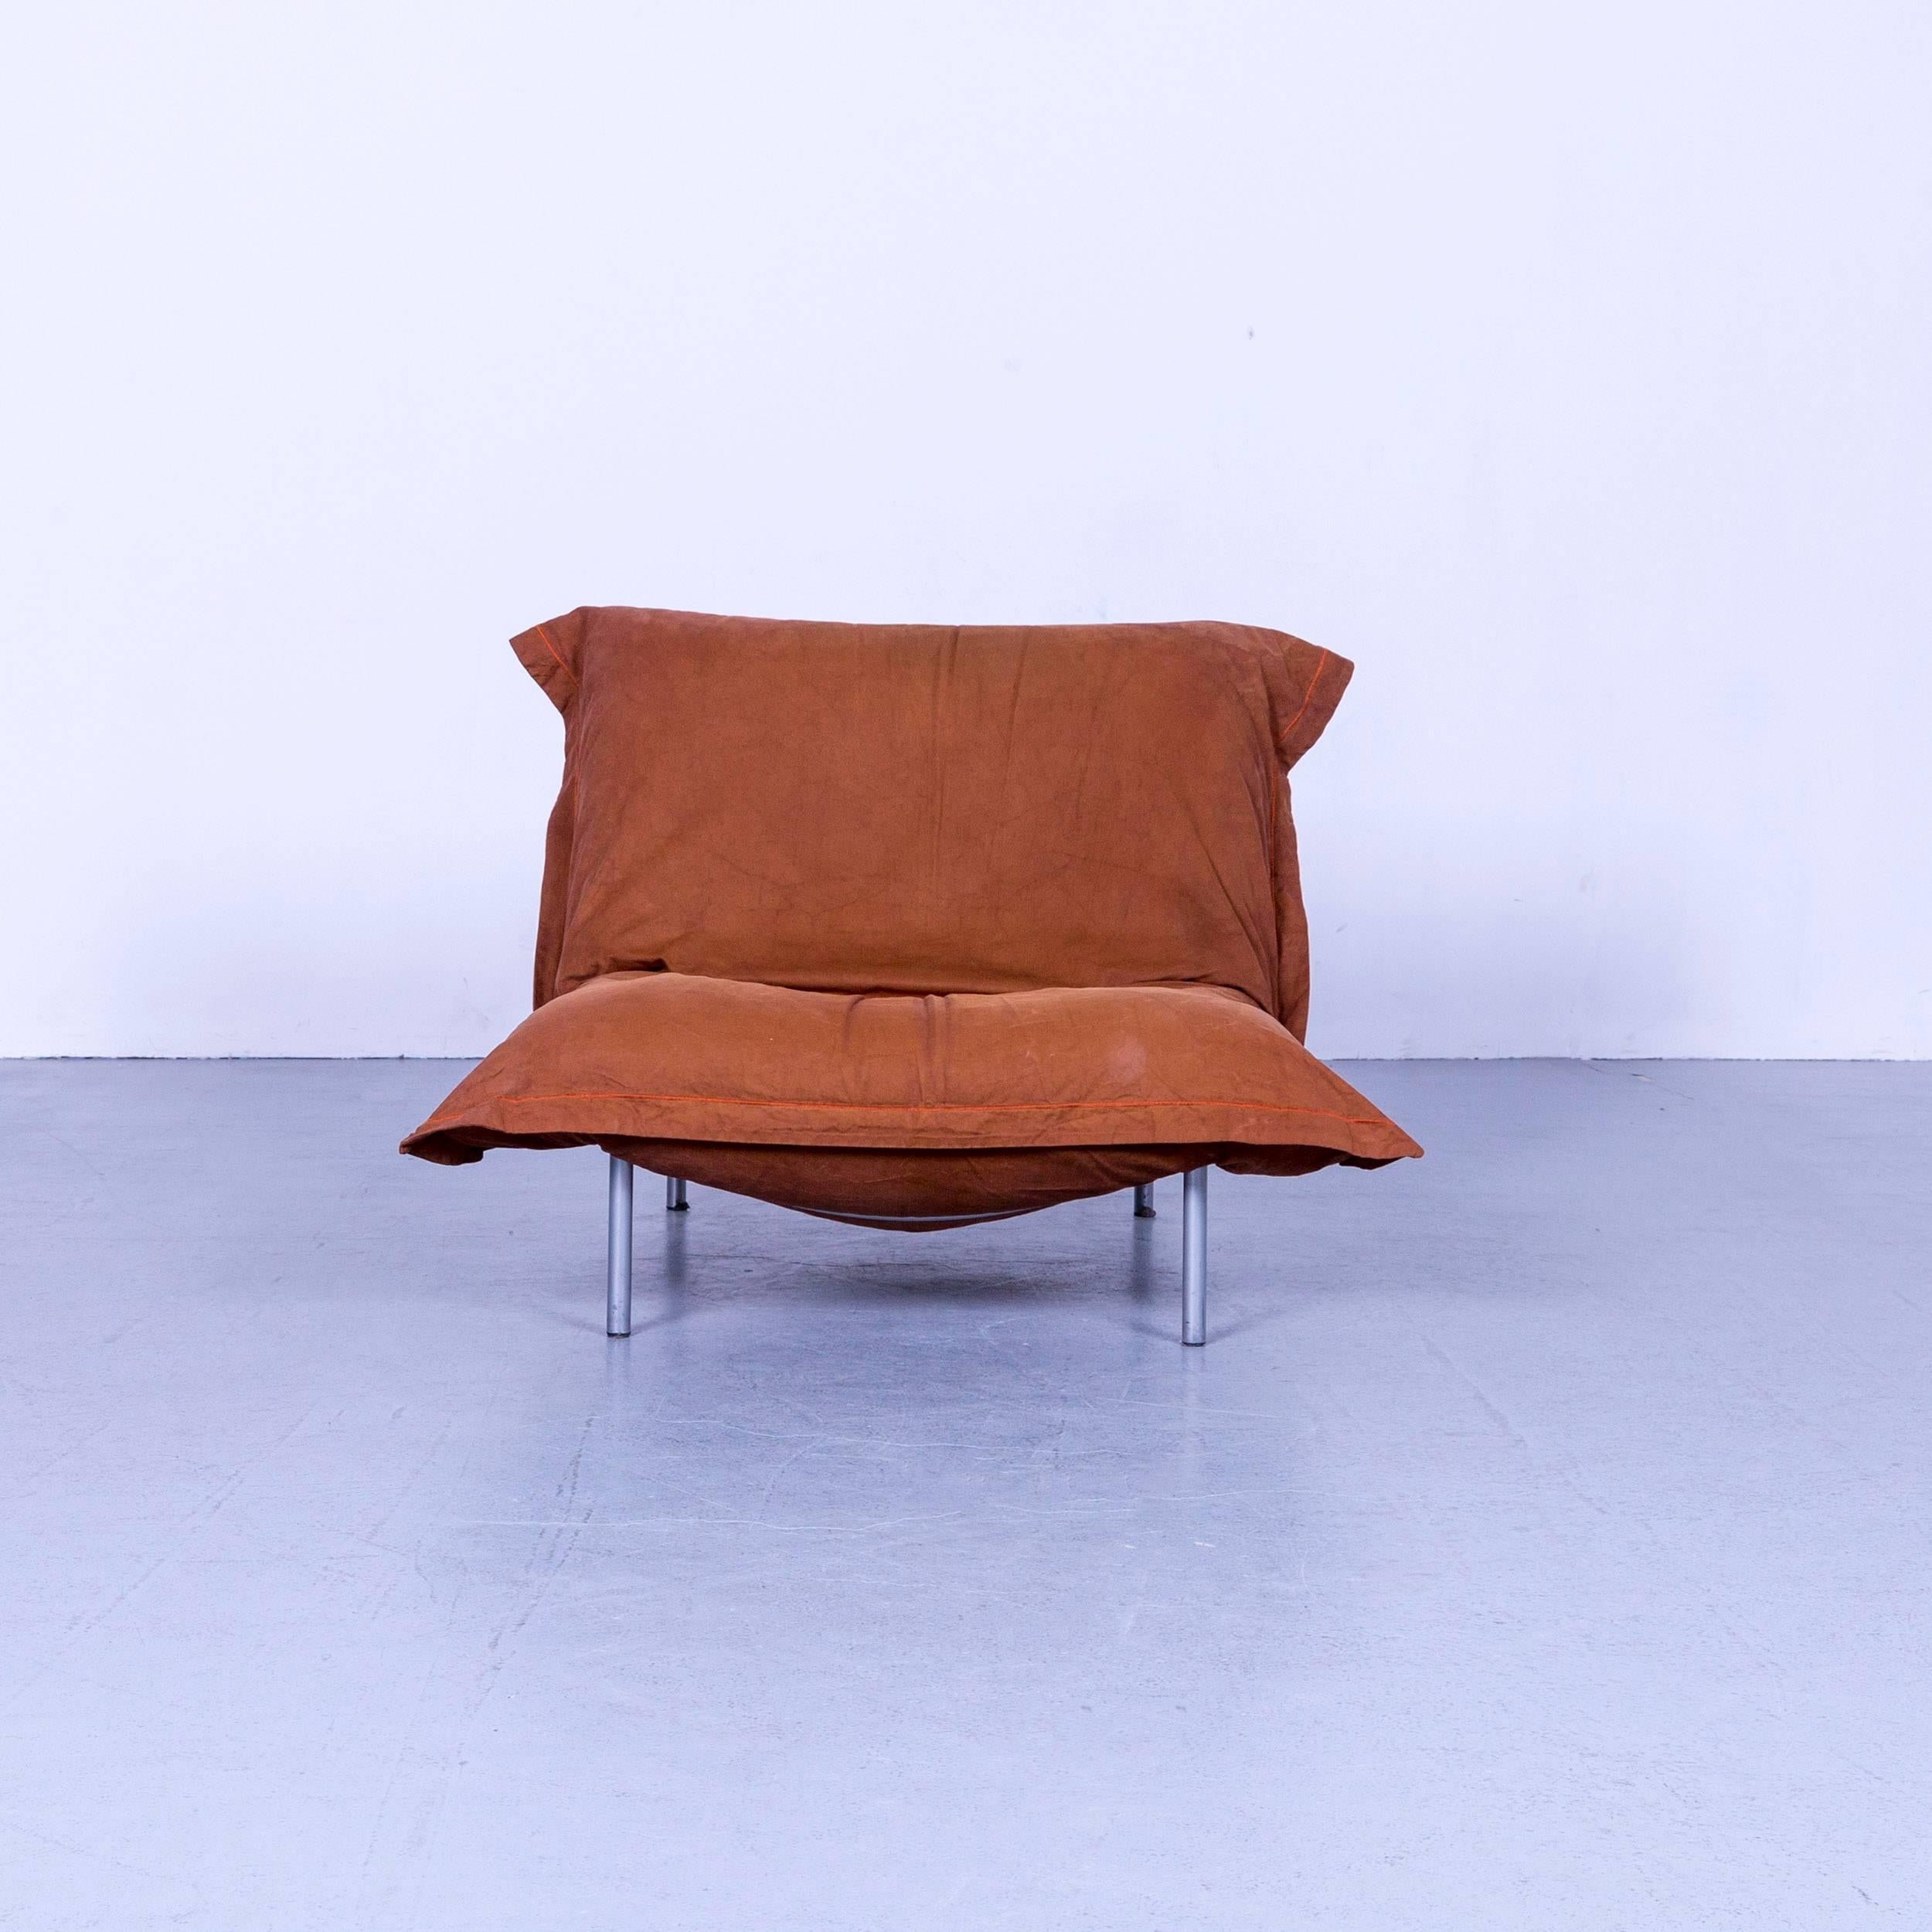 We offer delivery options to most destinations on earth. Find our shipping quotes at the bottom of this page in the shipping section.

We bring to you an Ligne Roset Calin fabric chair brown one-seat couch.

Shipping:

An on point shipping process